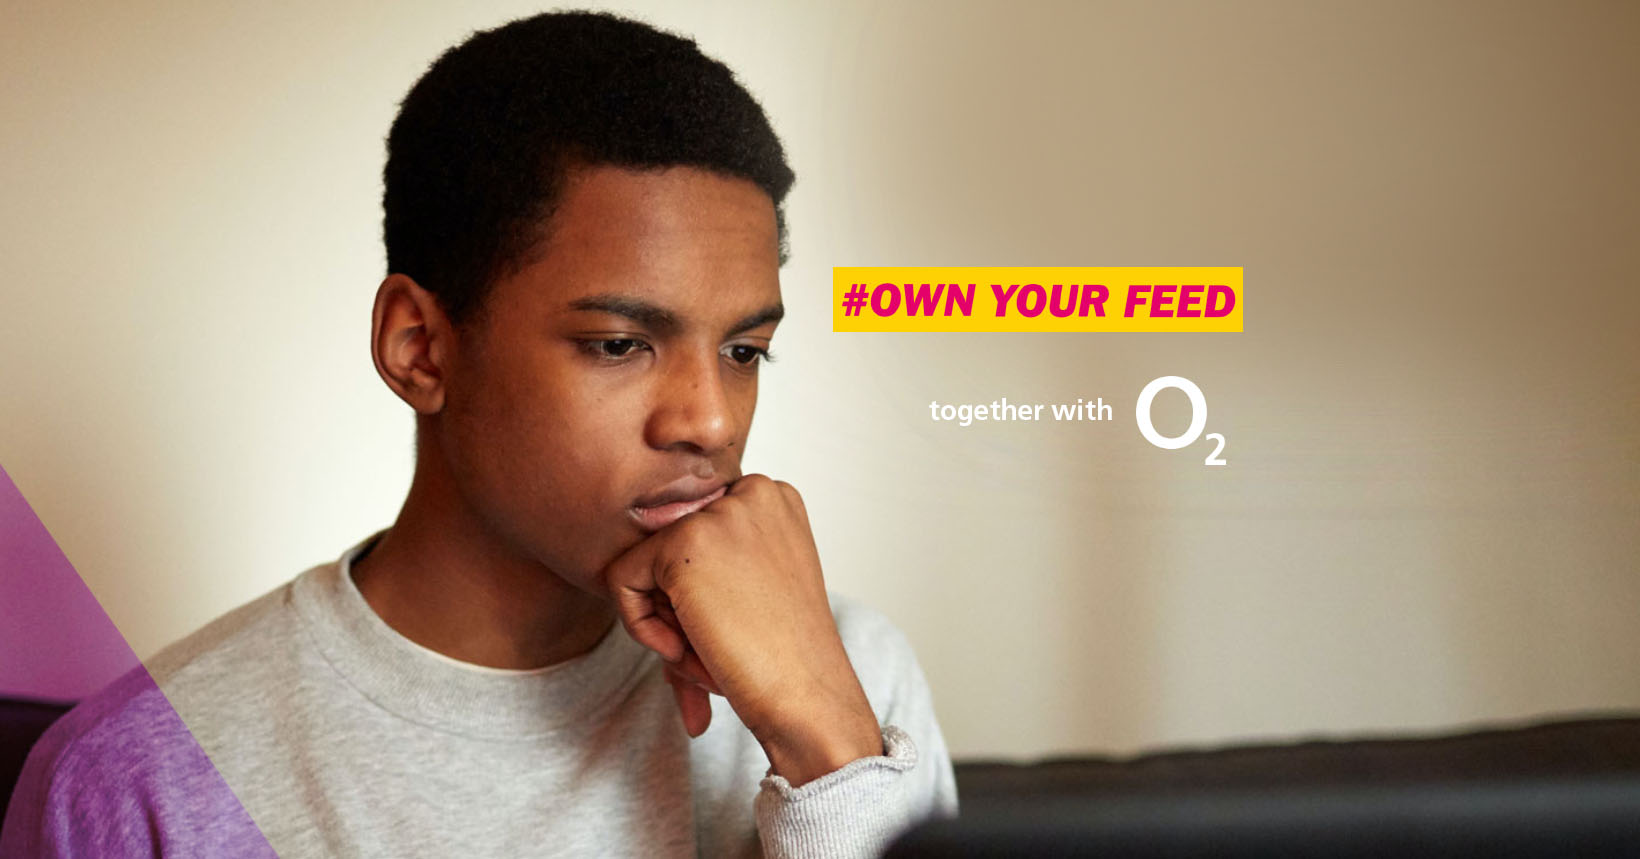 #OwnYourFeed: YoungMinds and O2 encourage young people to take control of their online feeds and make social media a positive place to be